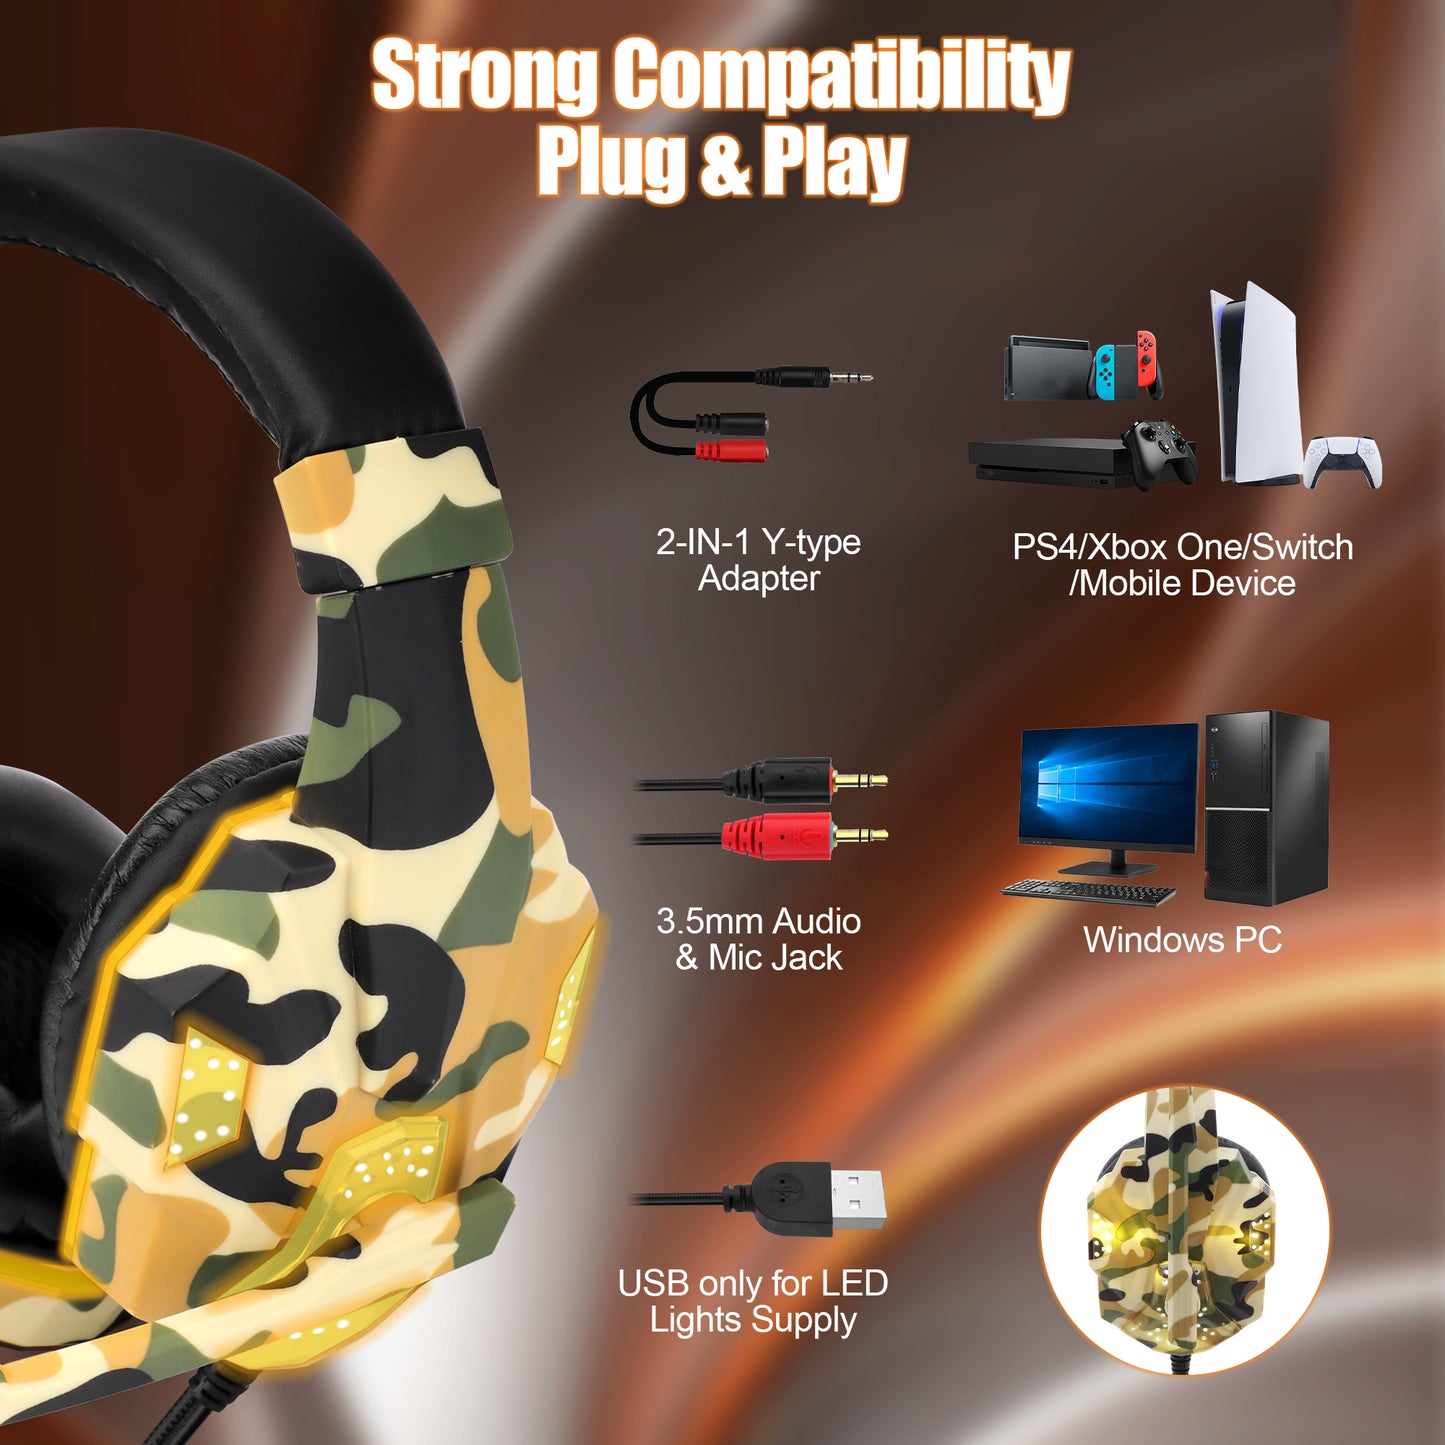 3.5mm Wired Over-Ear Headphones - with 7.1 Surround Sound, PC Headset with Noise Canceling Mic & LED Light, H3 Over Ear Headphones for Nintendo Switch, PS5, Xbox One, Laptop (Camo Yellow)